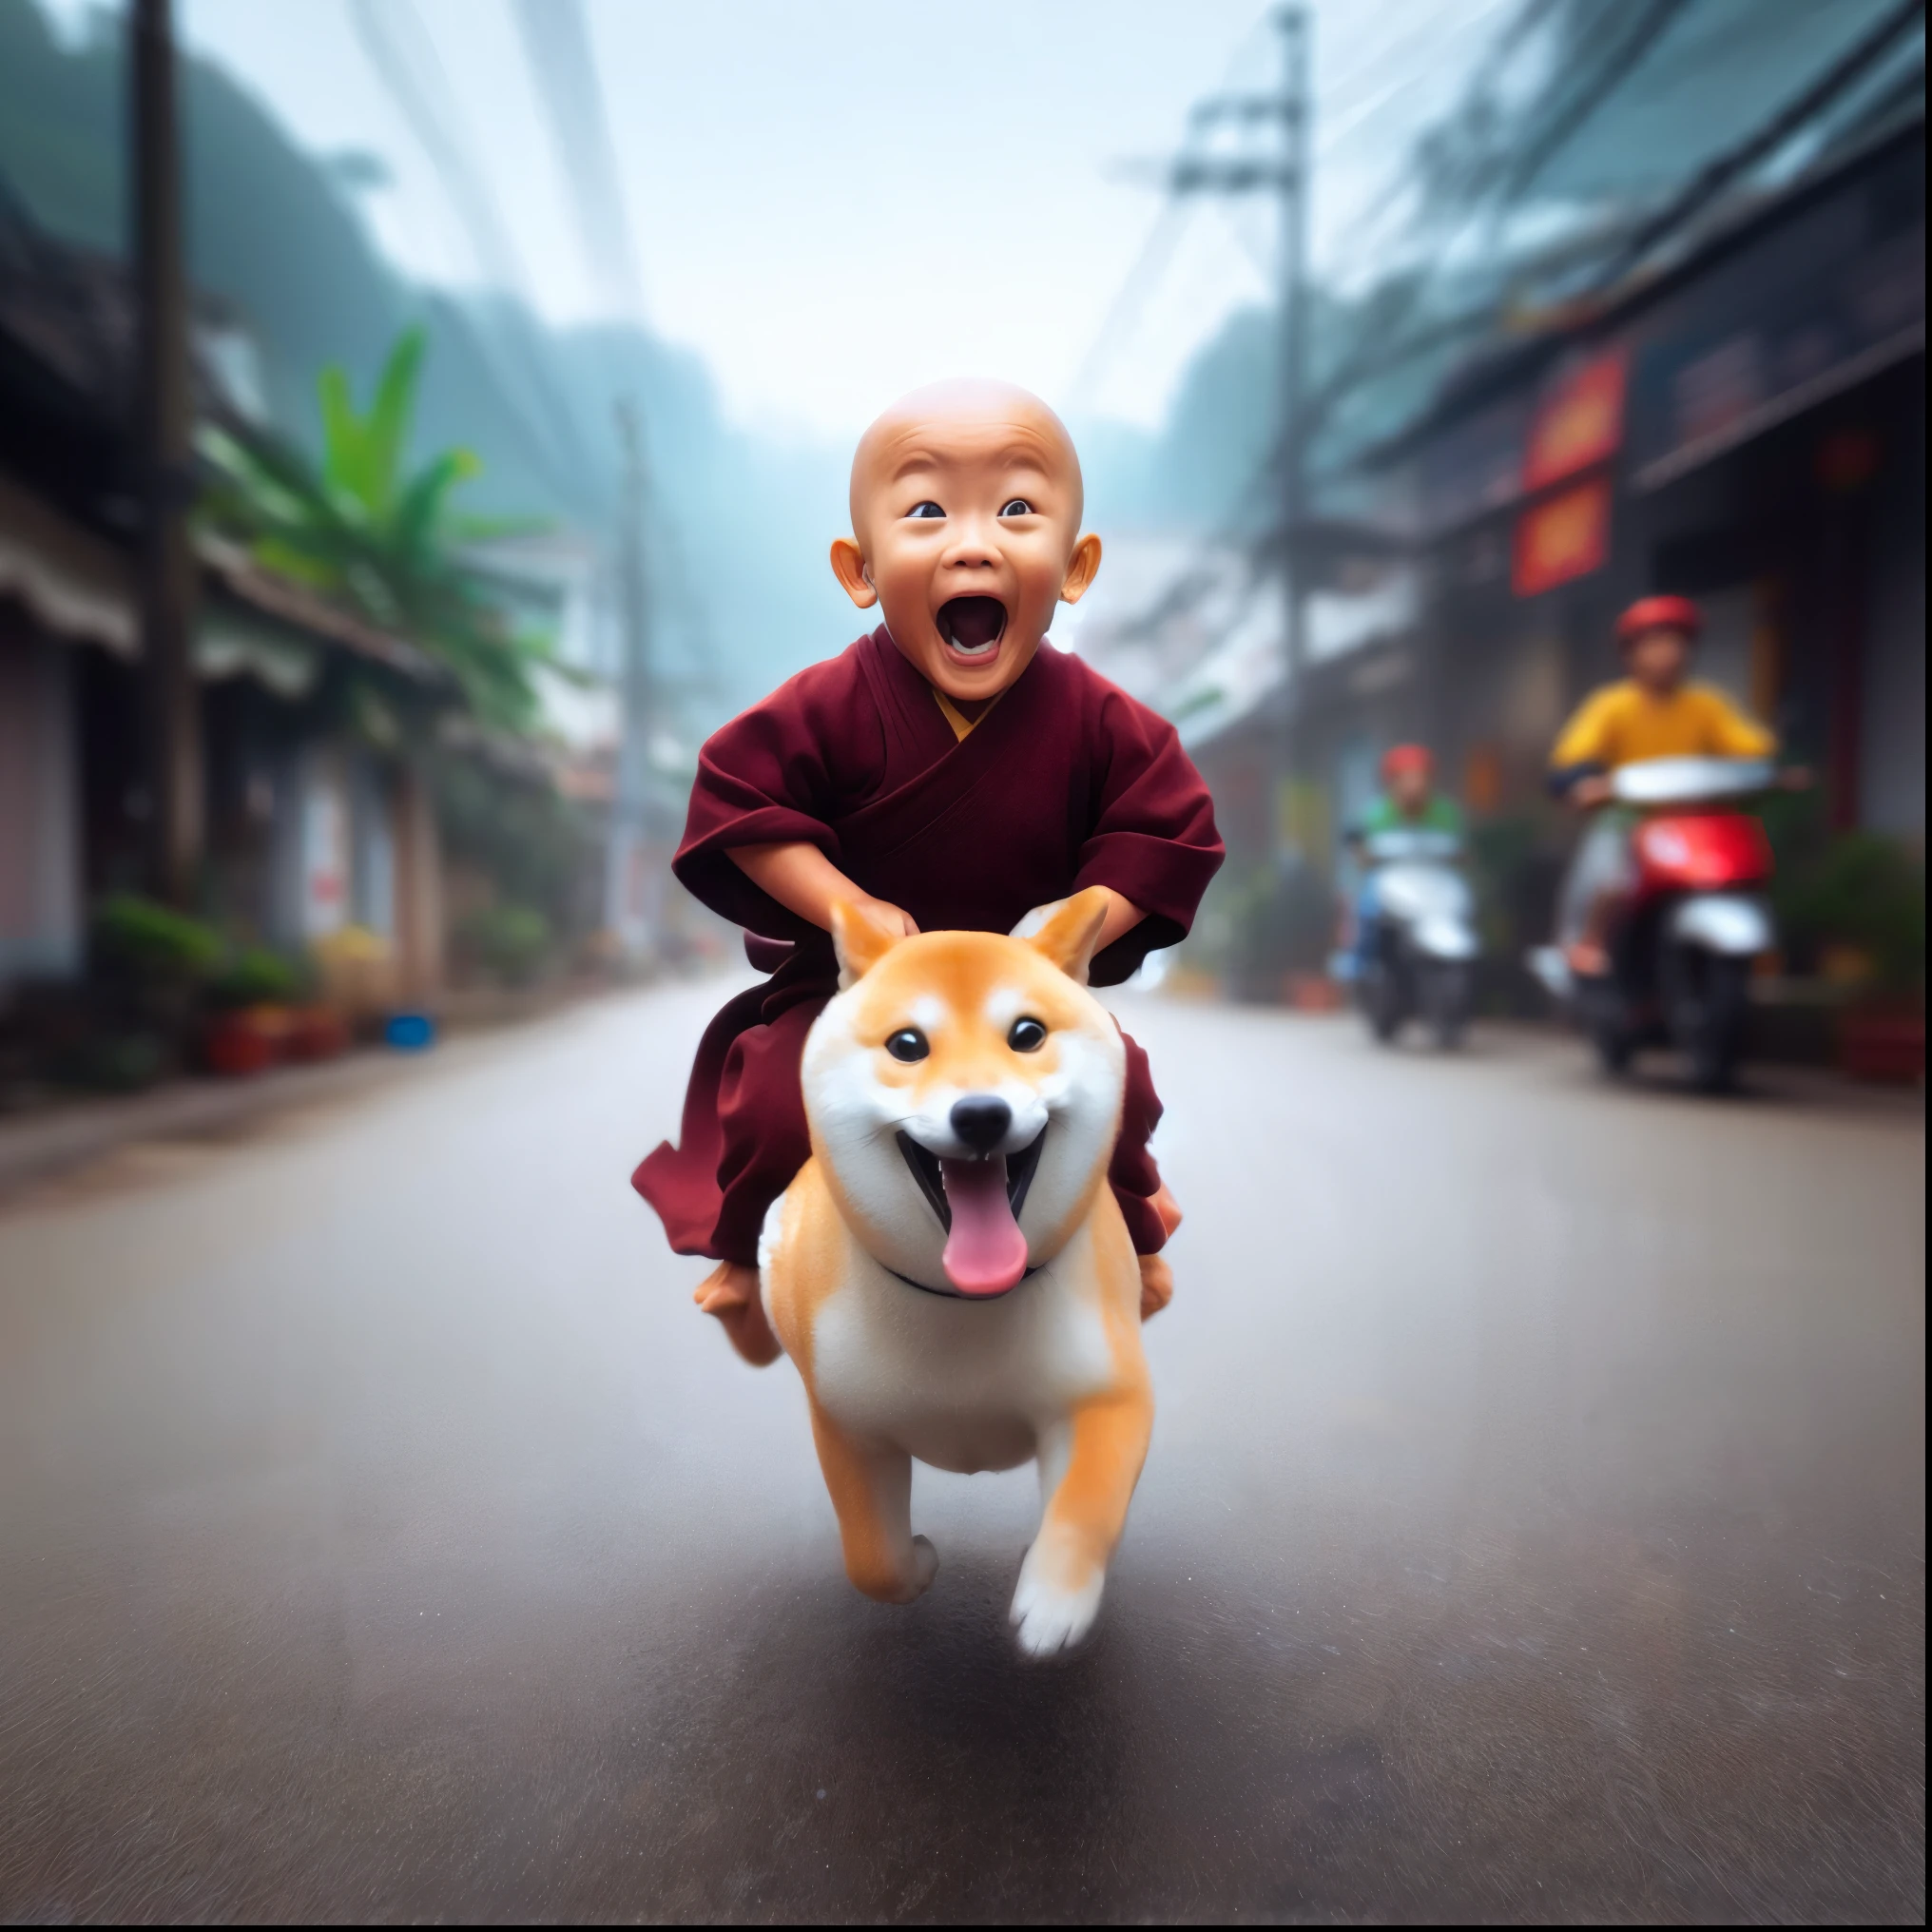 arafed image of a monk riding a dog on a street, buddhist, dog as a god, 2 1 st century monk, amazing depth, doge, buddhism, awesome, with his hyperactive little dog, artwork in the style of guweiz, adorable digital painting, monk, he is very happy, pure joy, inspired by Shiba Kōkan